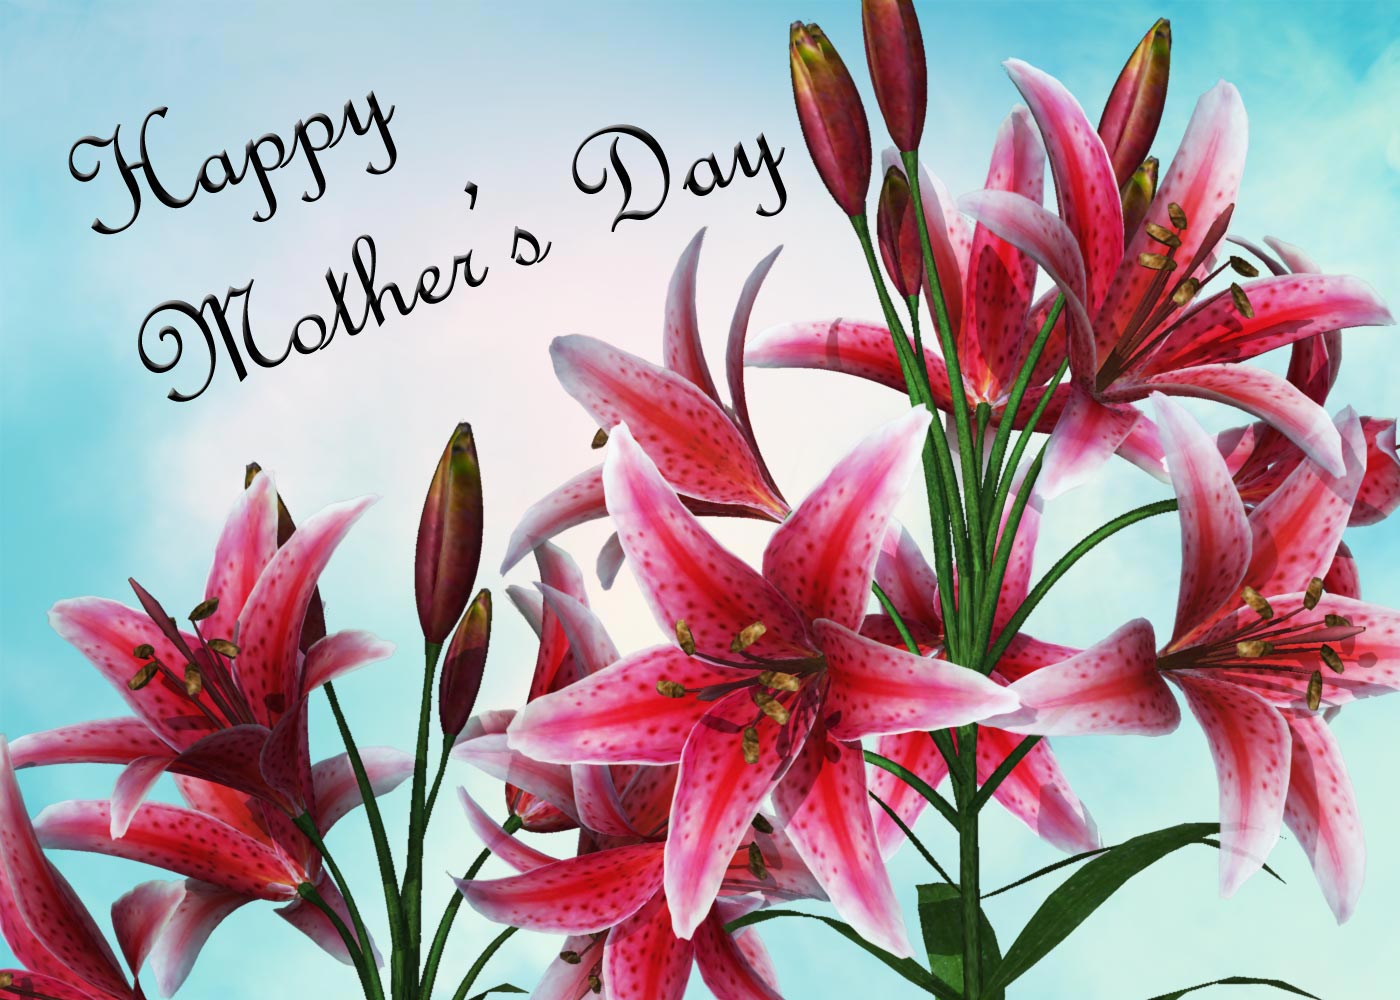 Lilies with Happy Mother's Day message